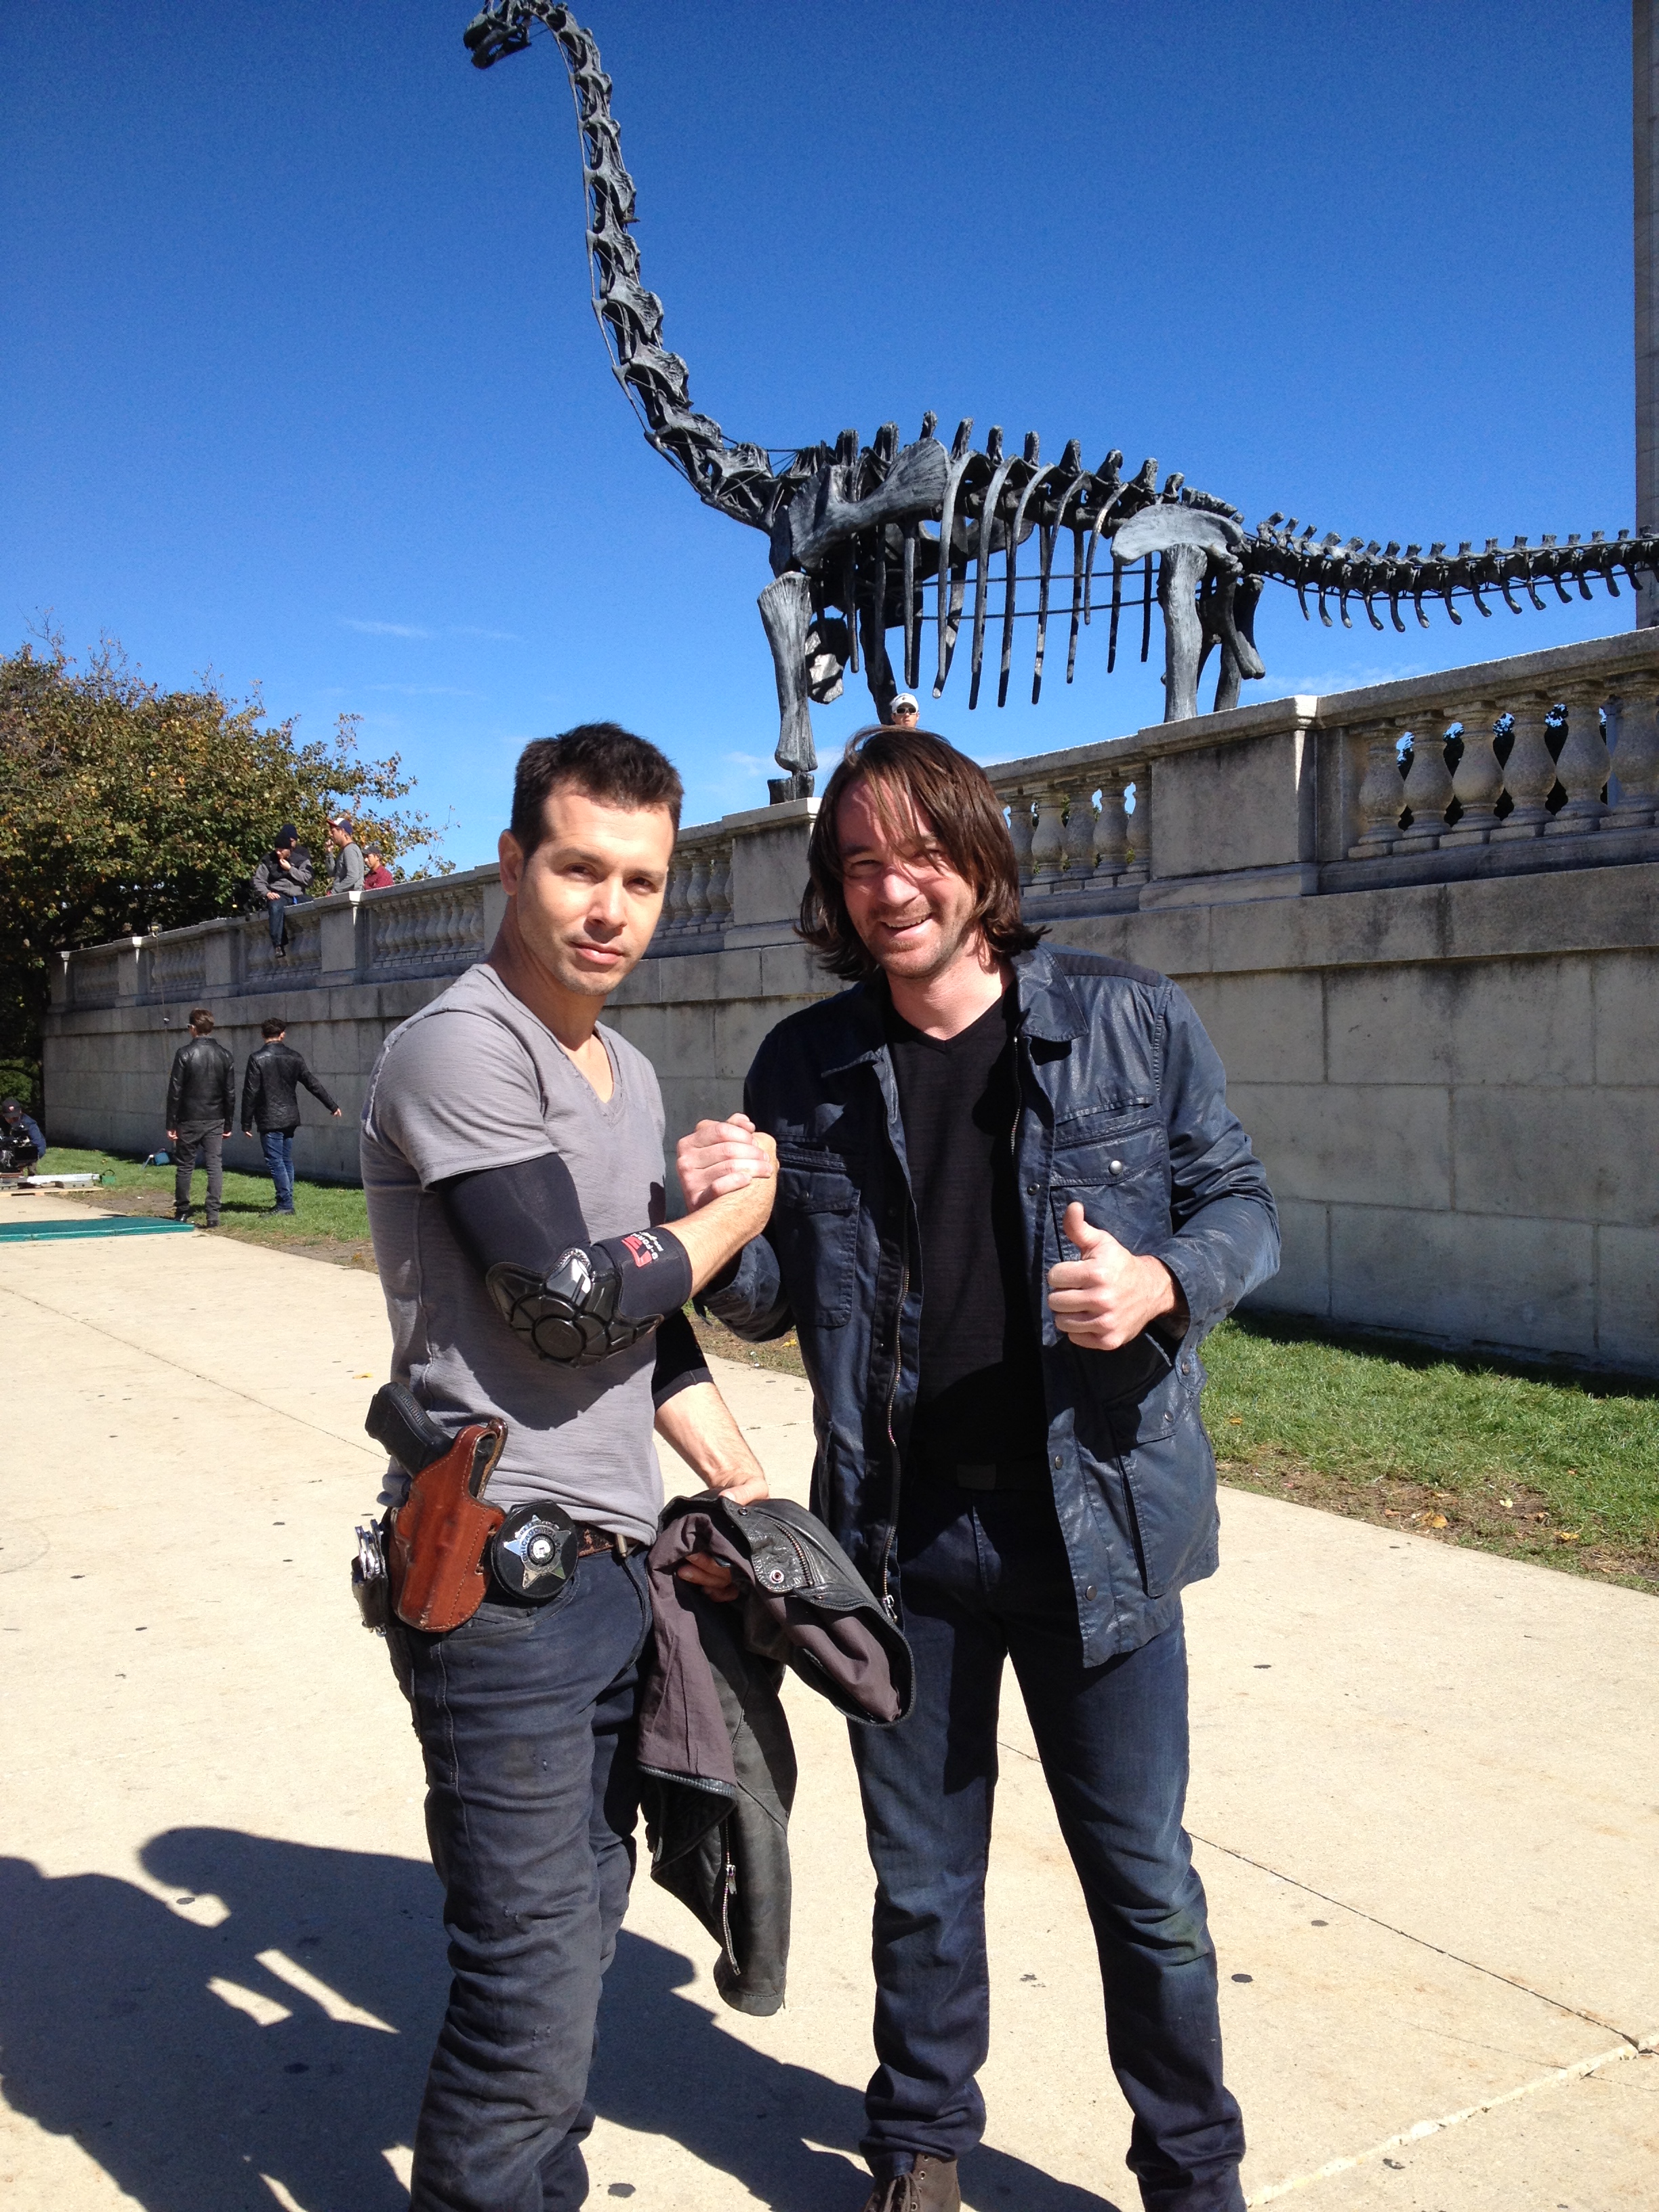 Ryan Carr and actor Jon Seda on location at the Field Museum with Chicago P.D.